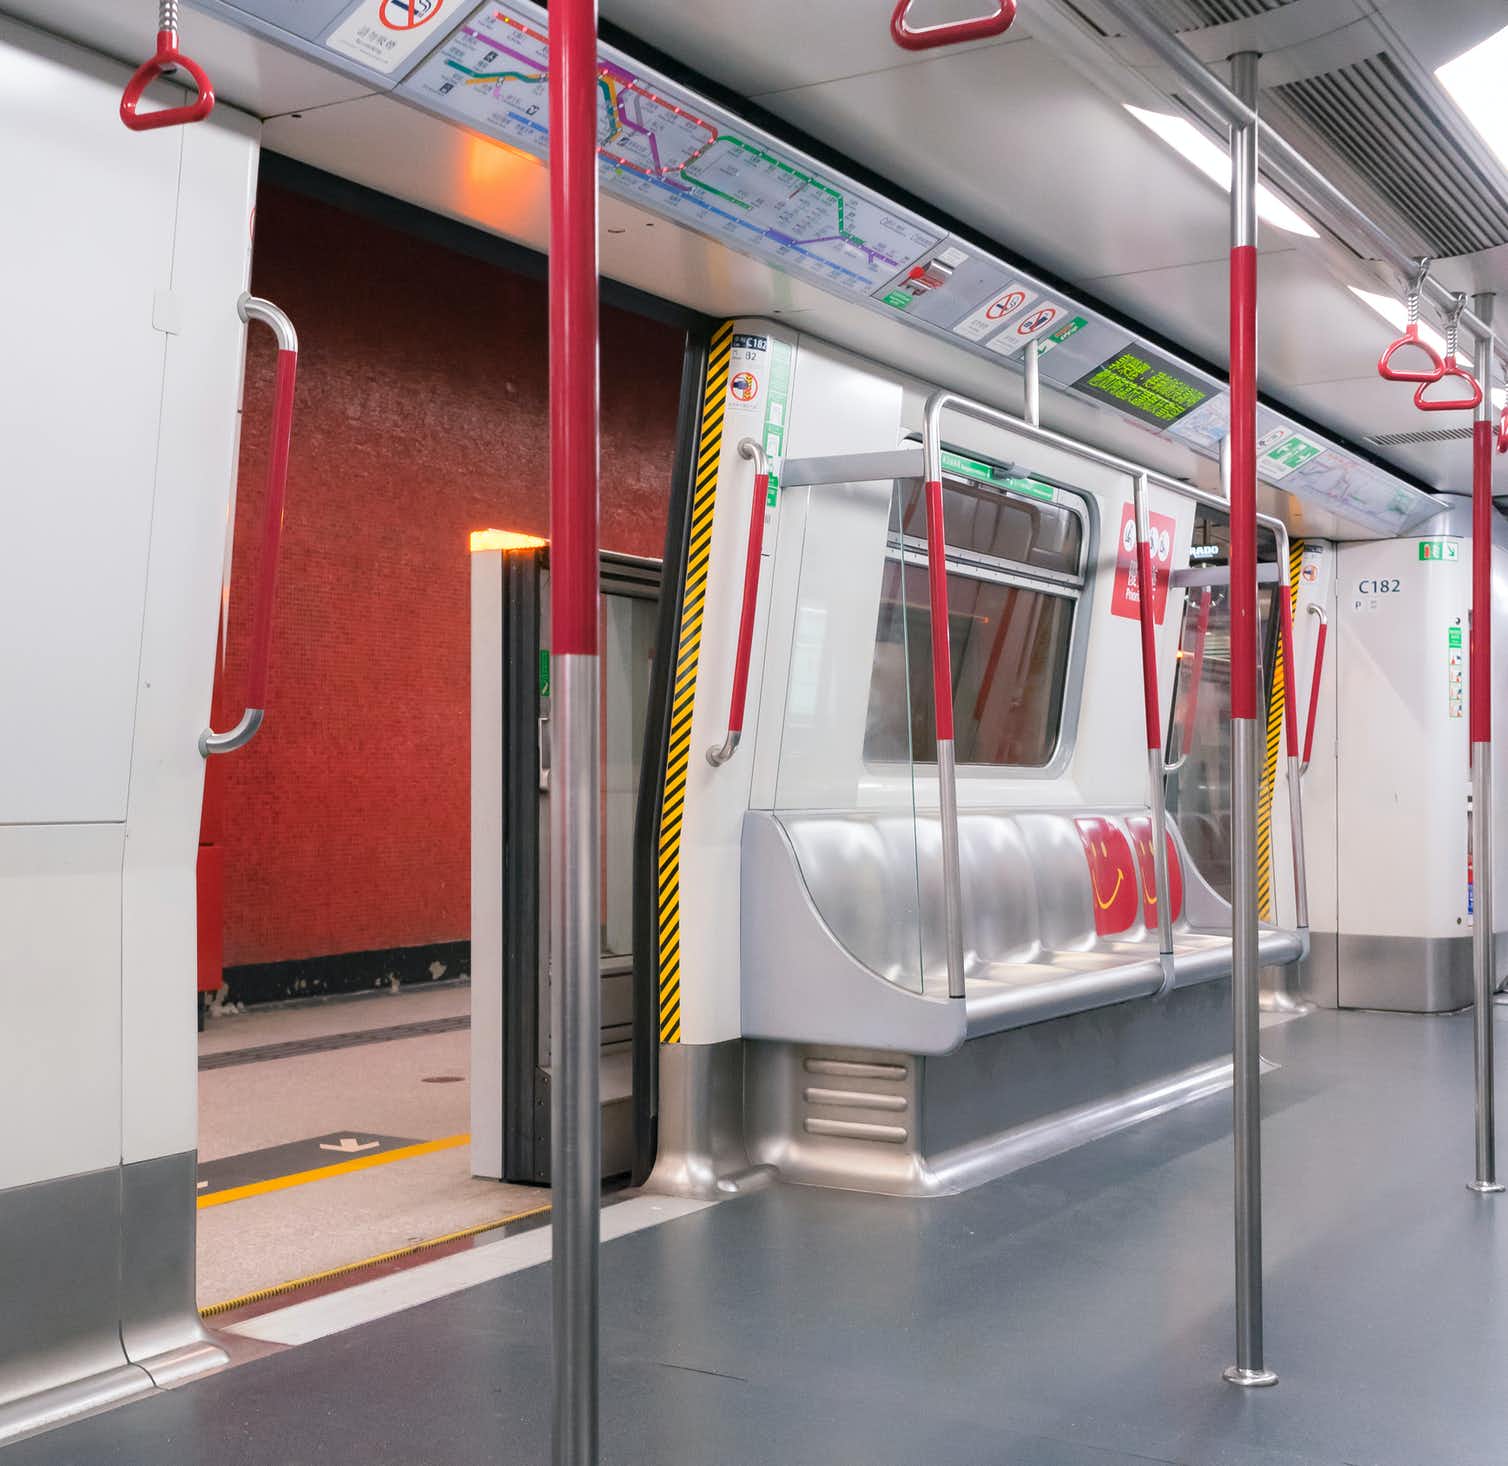 An empty carriage on the Hong Kong MTR, May 2020